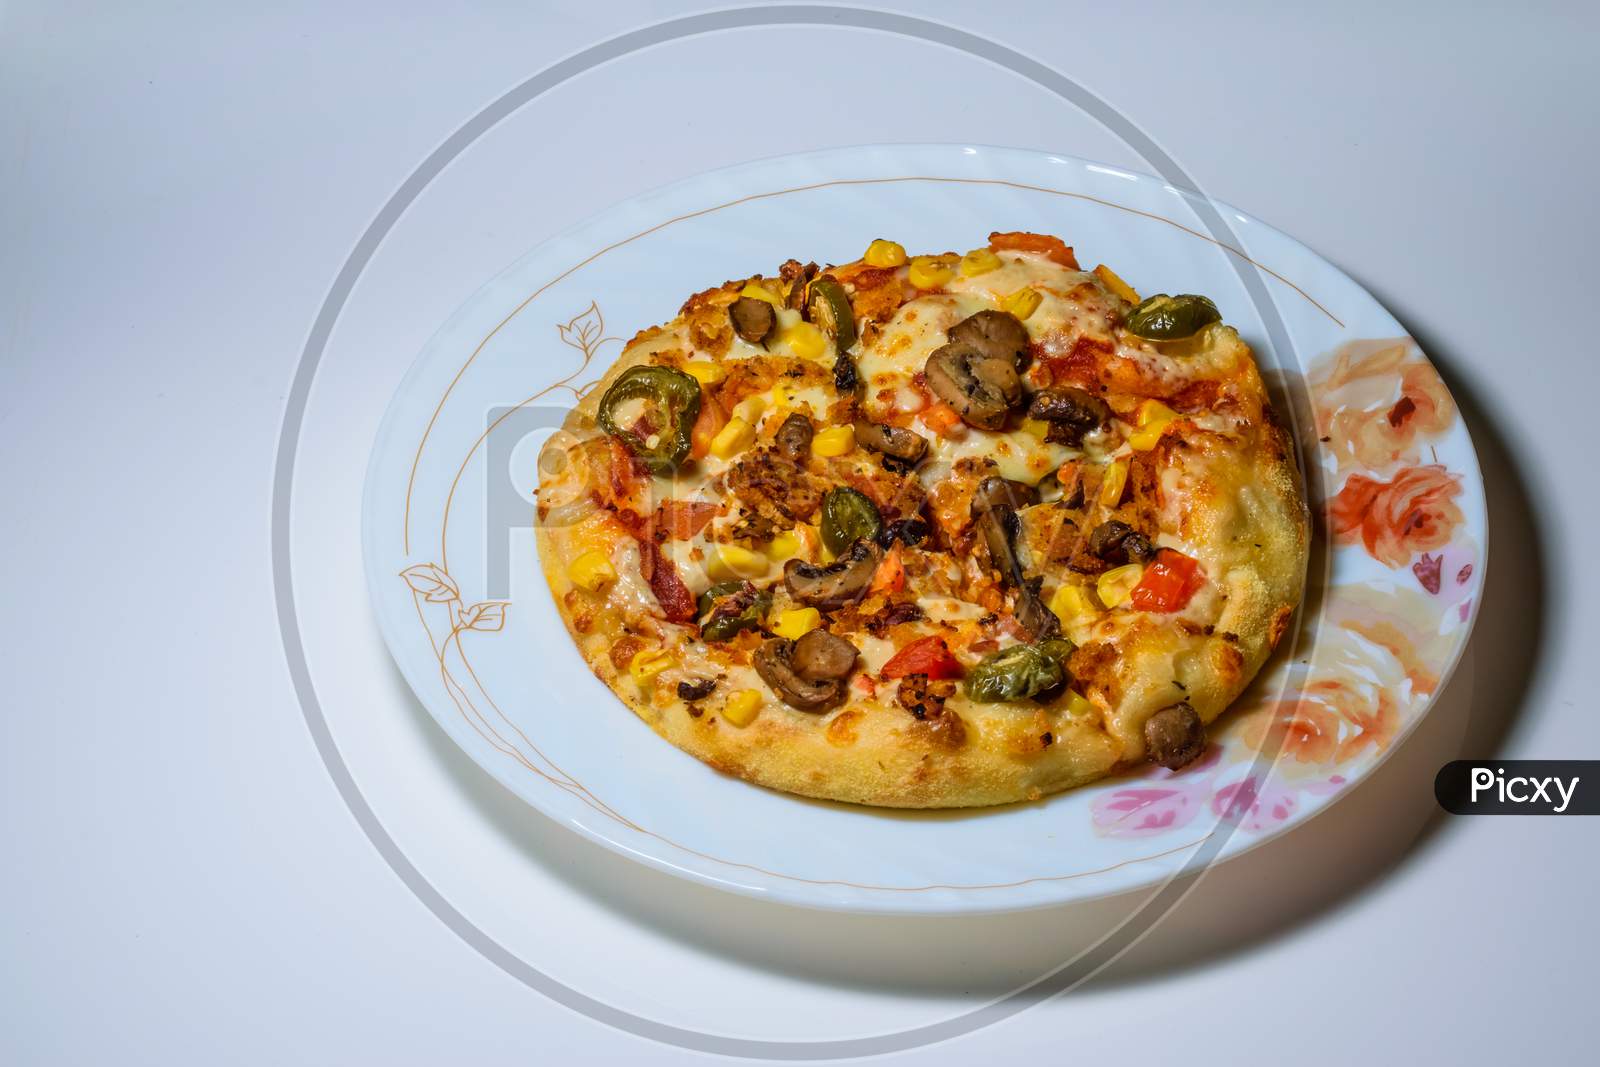 Vegetable Pizza Placed On A White Plate And Kept On A White Table With Space For Text In The Left